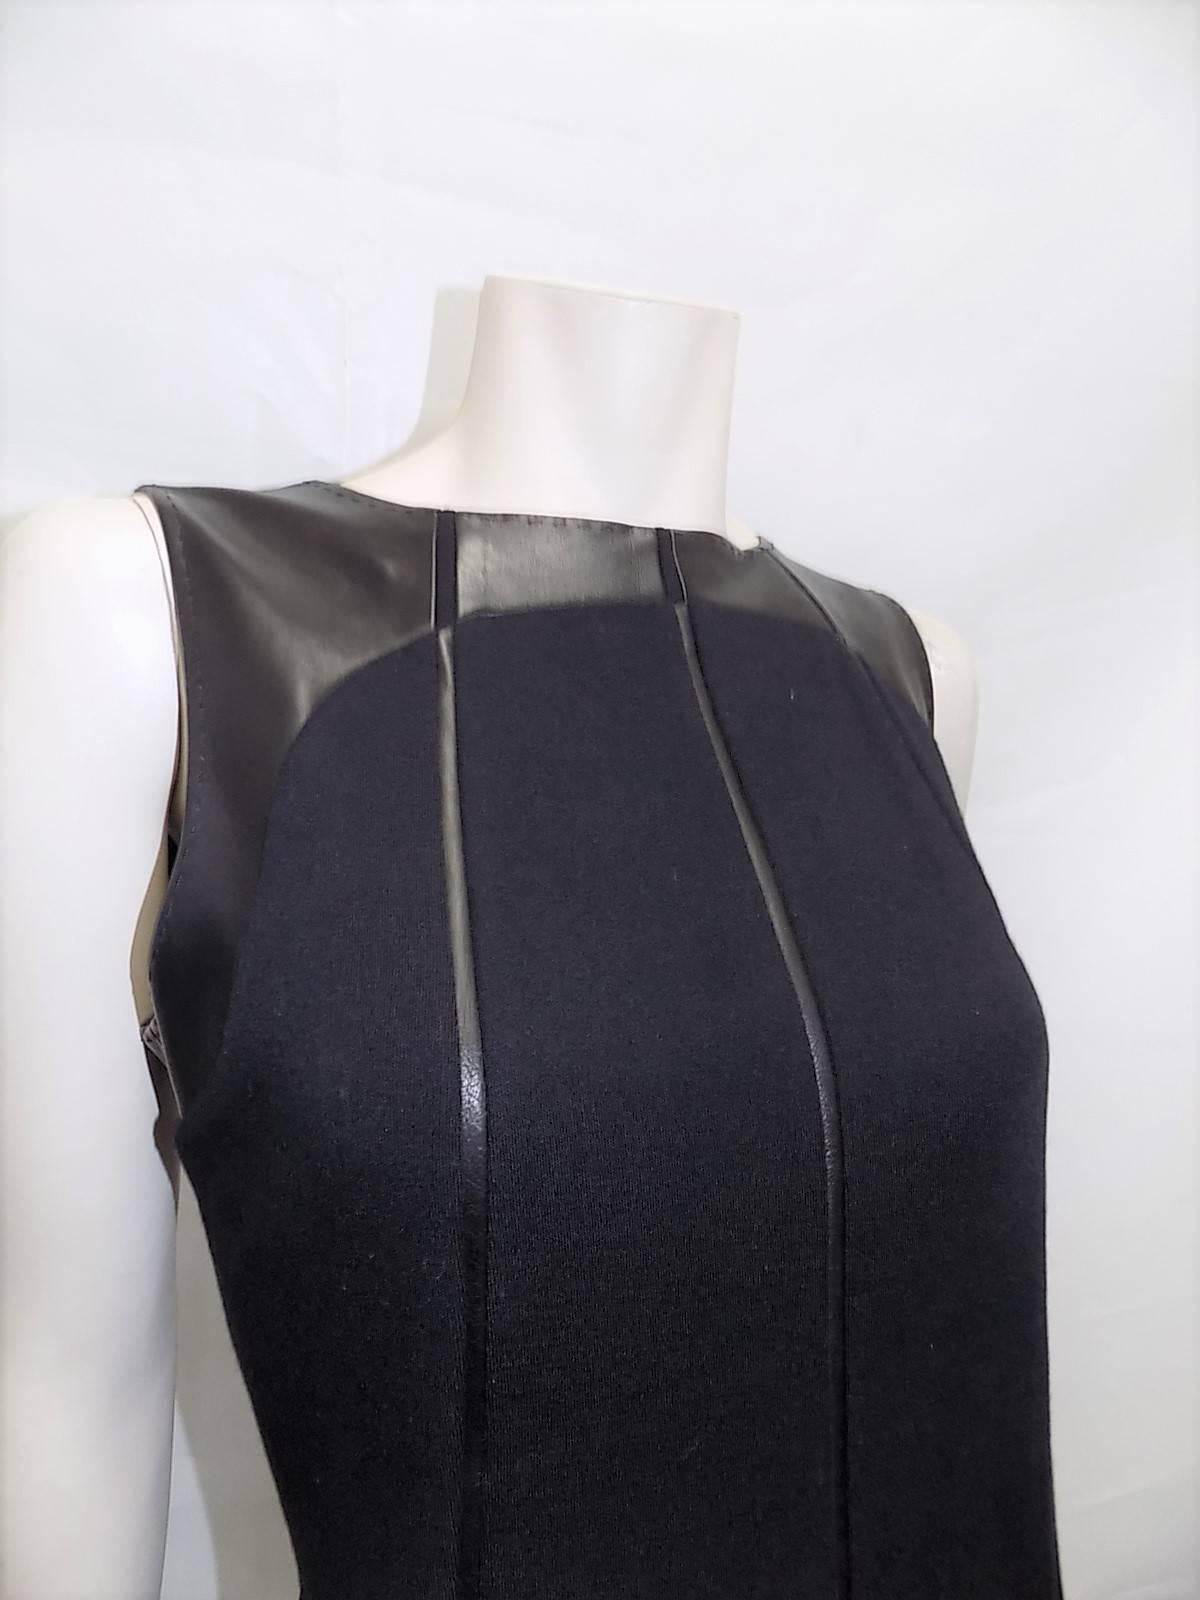 Beautiful Ralph Rucci Chado Black Wool  Jersey dress with Leather Inserts. Pristine condition . Silk Lined.  Sz 12
Bust 38